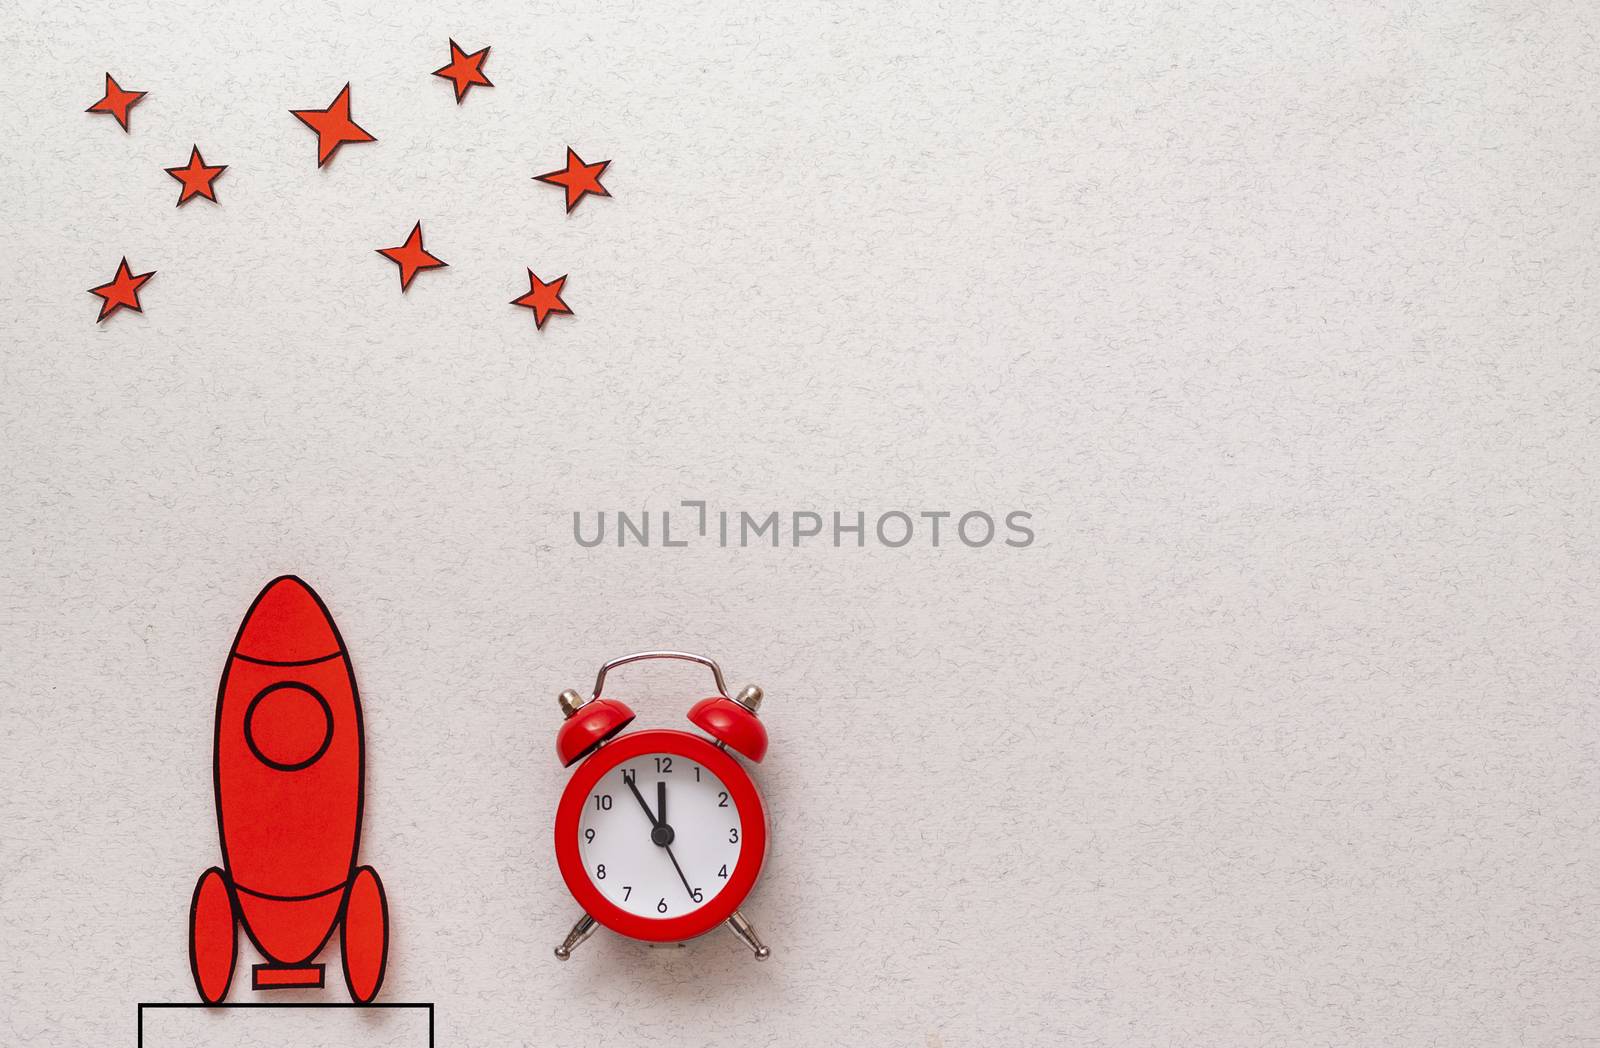 Red cartoon rocket on a launch pad aiming for the stars alongside an alarm clock counting down to takeoff over a white background with copy space